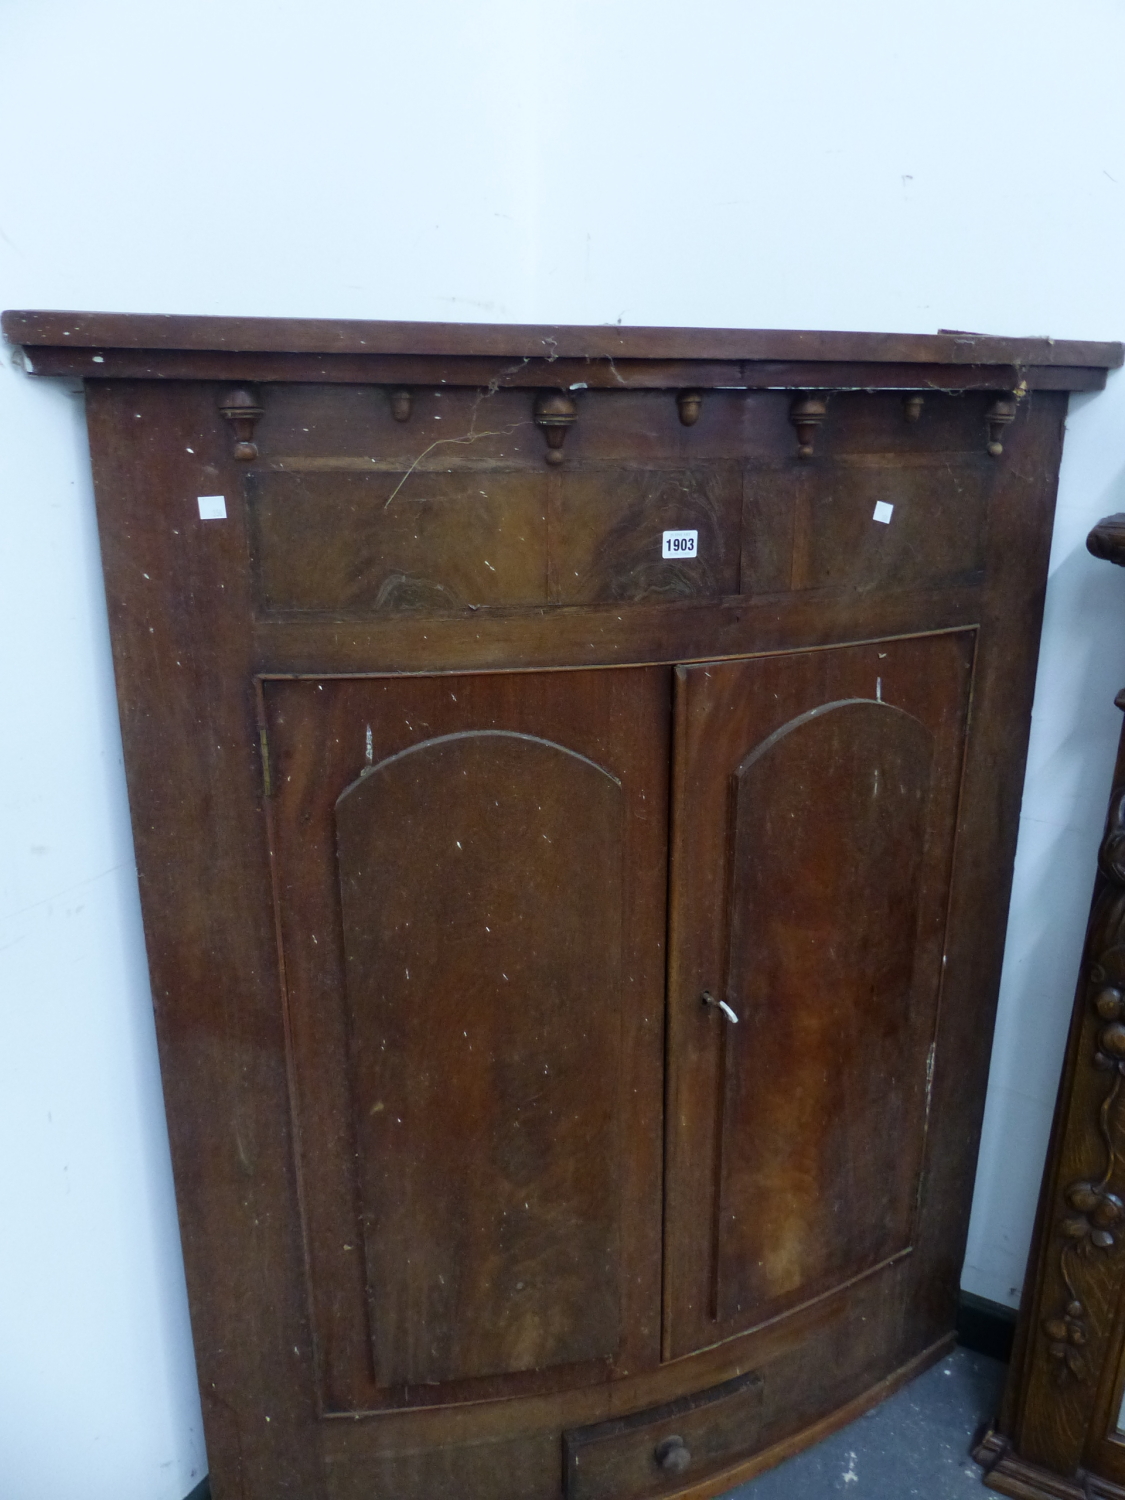 A GEORGE III MAHOGANY BOW FRONT CORNER CUPBOARD, THE ROUND ARCH PANELLED DOORS ABOVE A SMALL DRAWER.